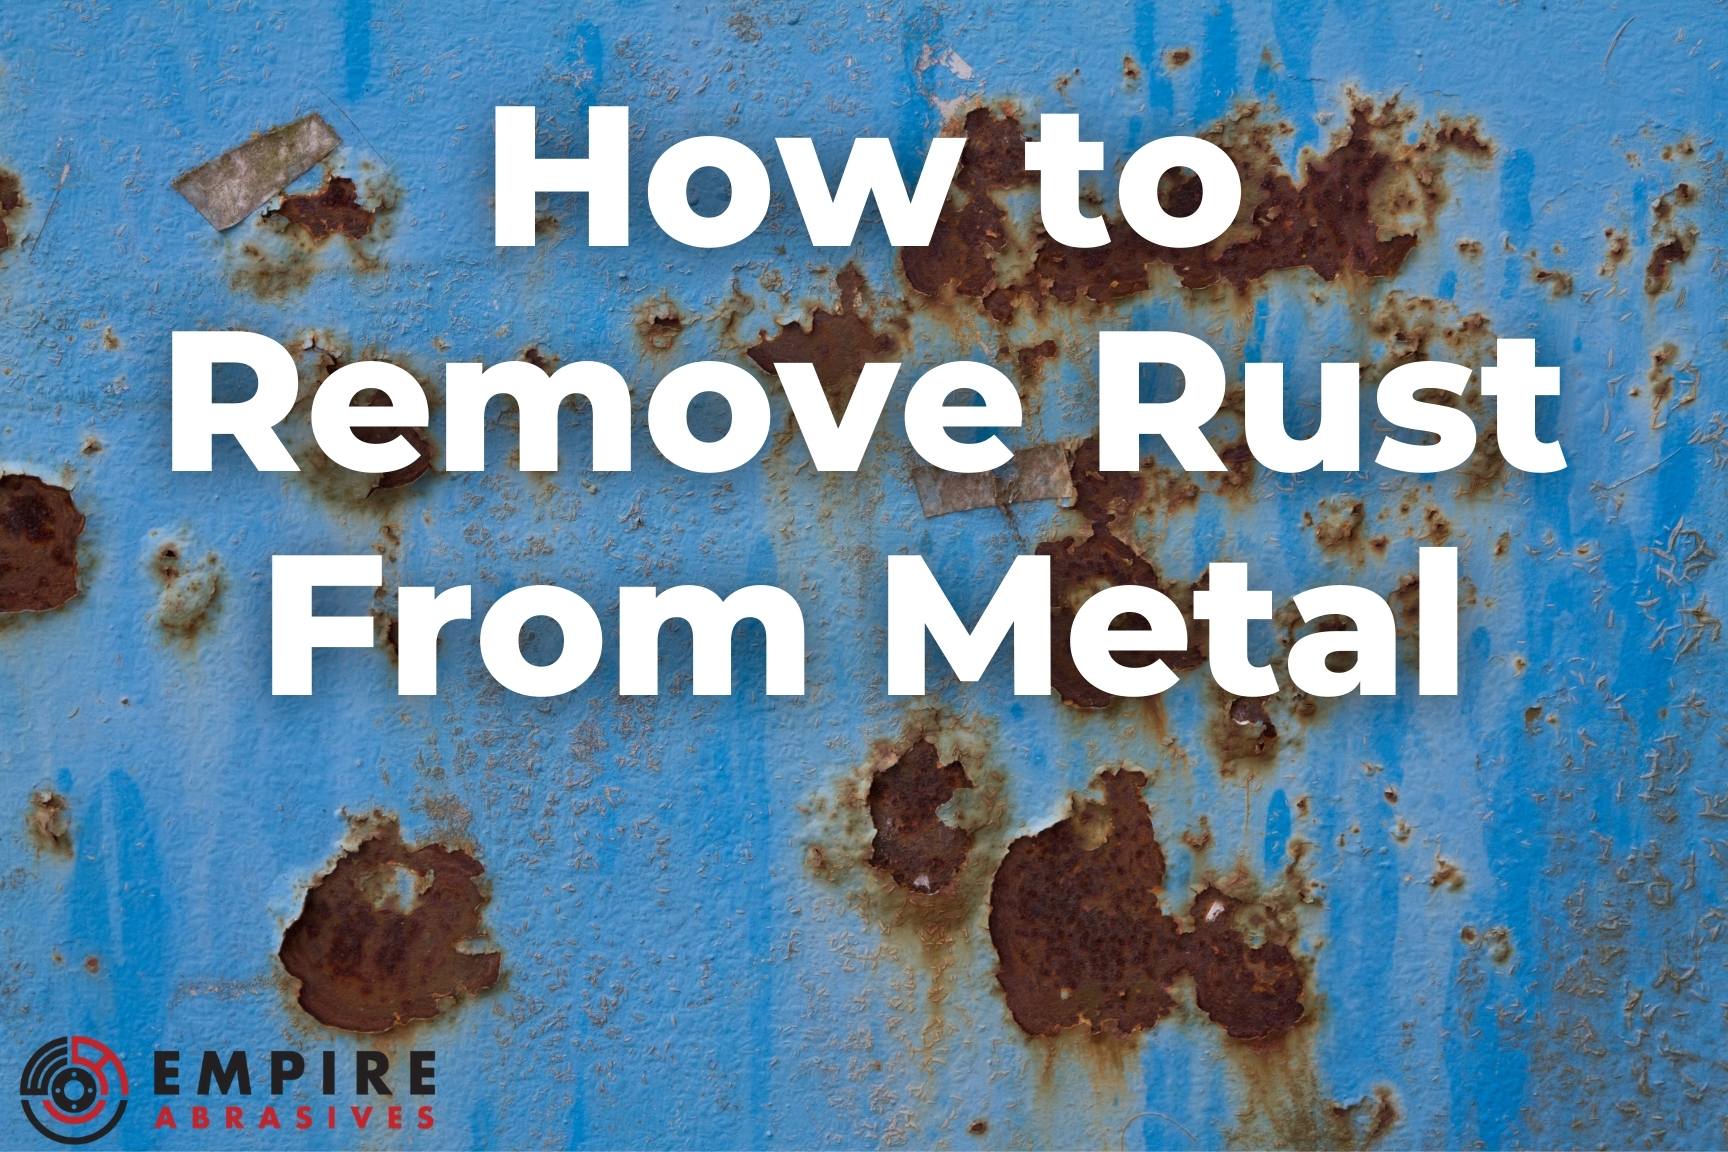 How to Remove Rust From Metal - From Natural DIY to Power Tools